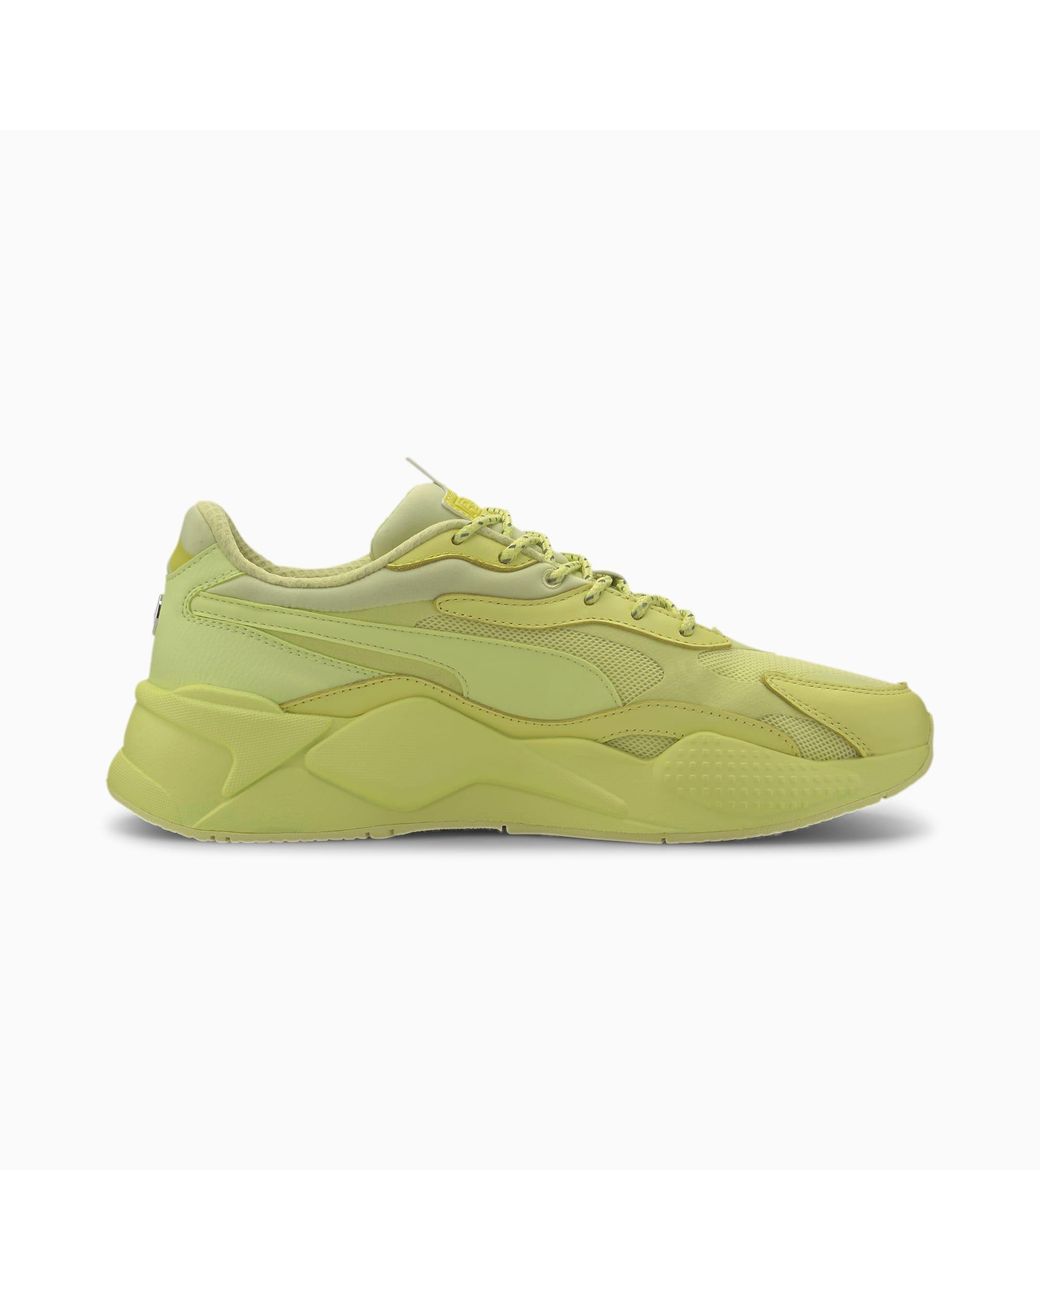 PUMA Mercedes Amg Petronas Rs-x3 Sneakers in Green for Men | Lyst